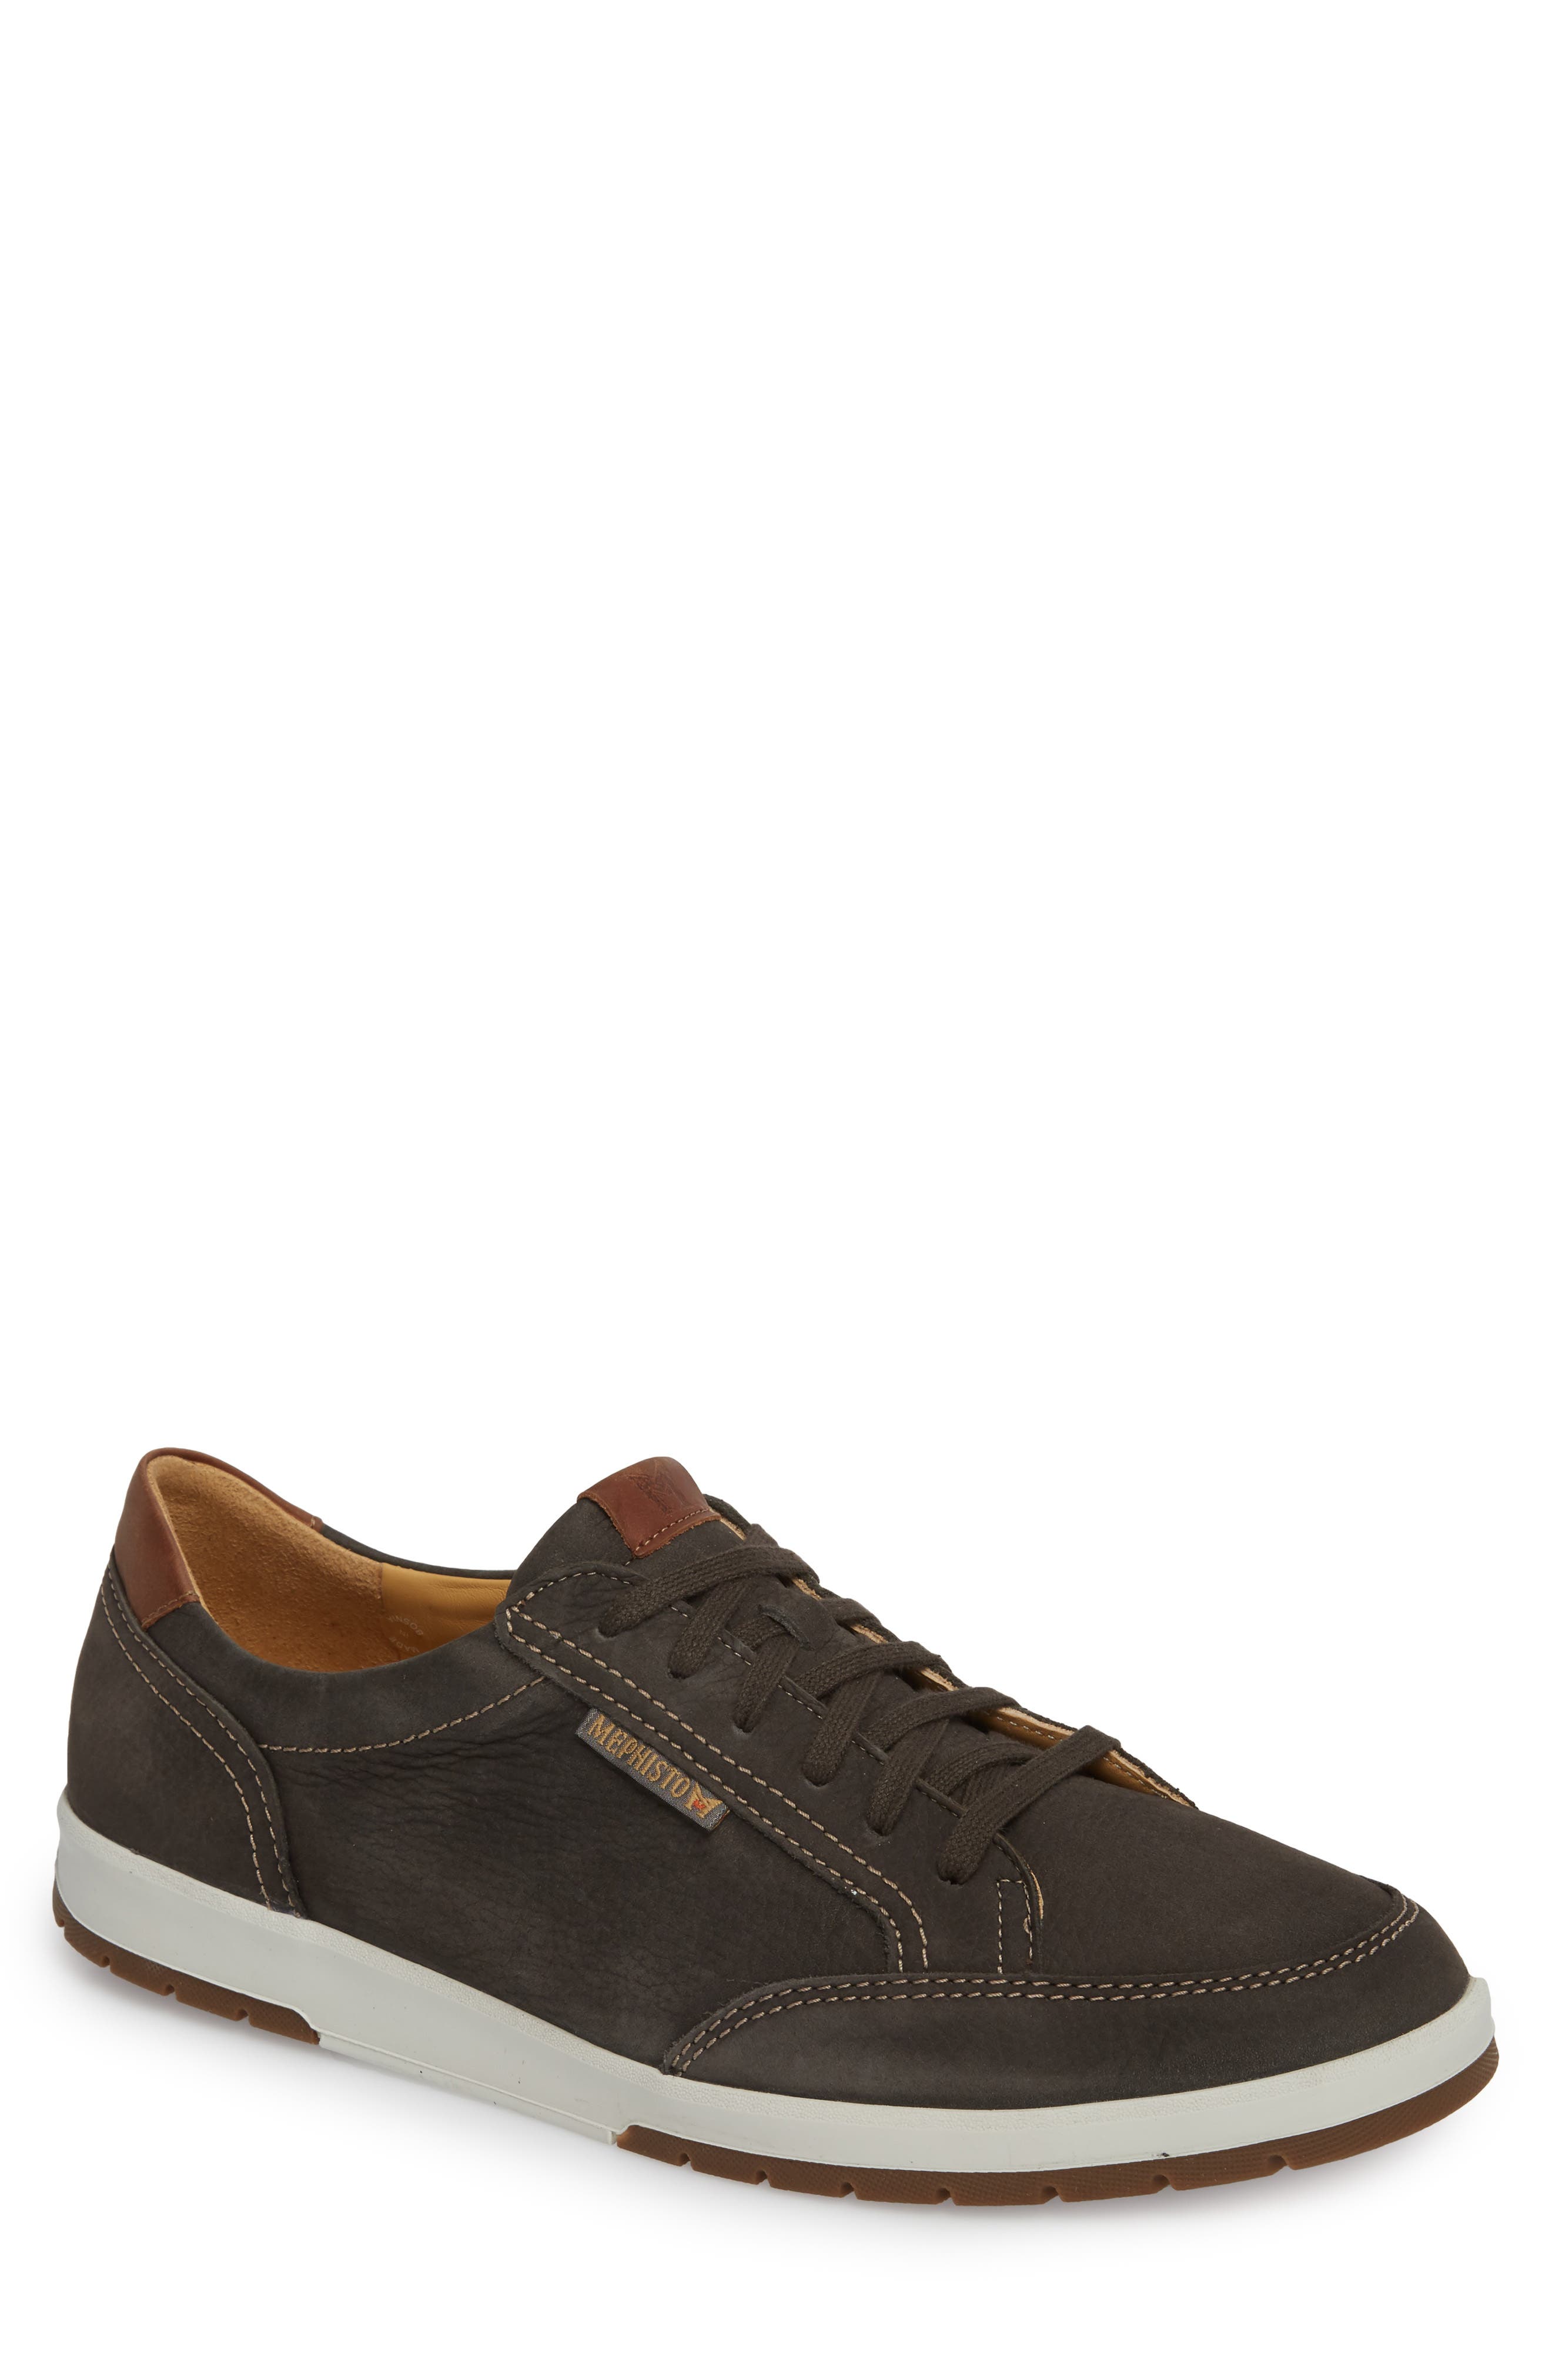 mephisto men's casual shoes